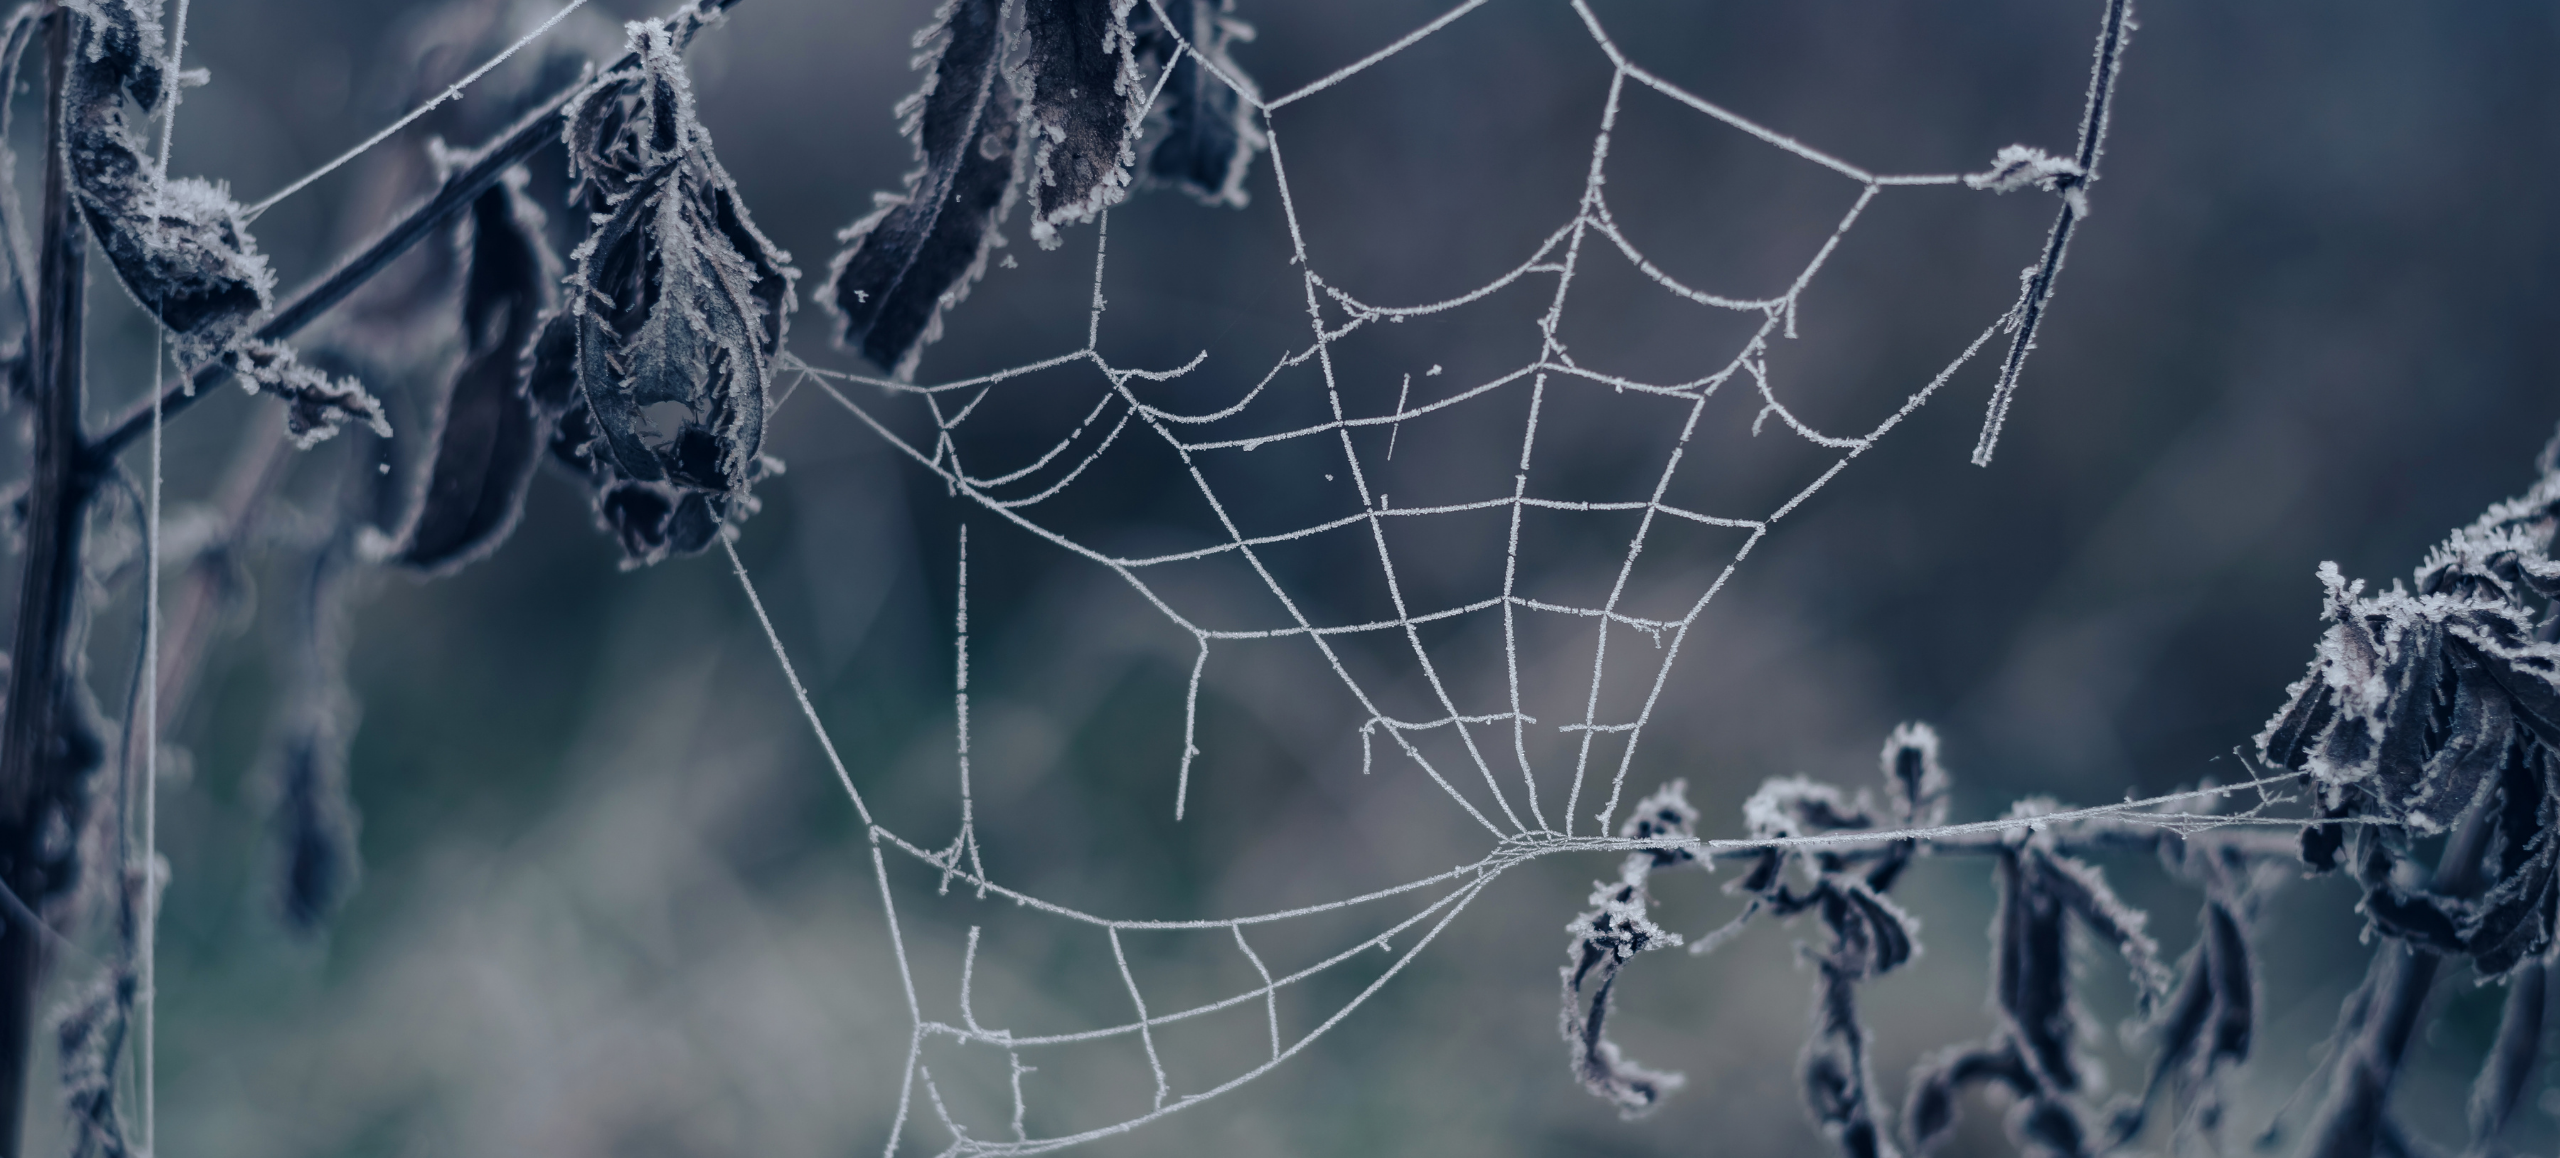 Icy spiderweb attached to dead plants